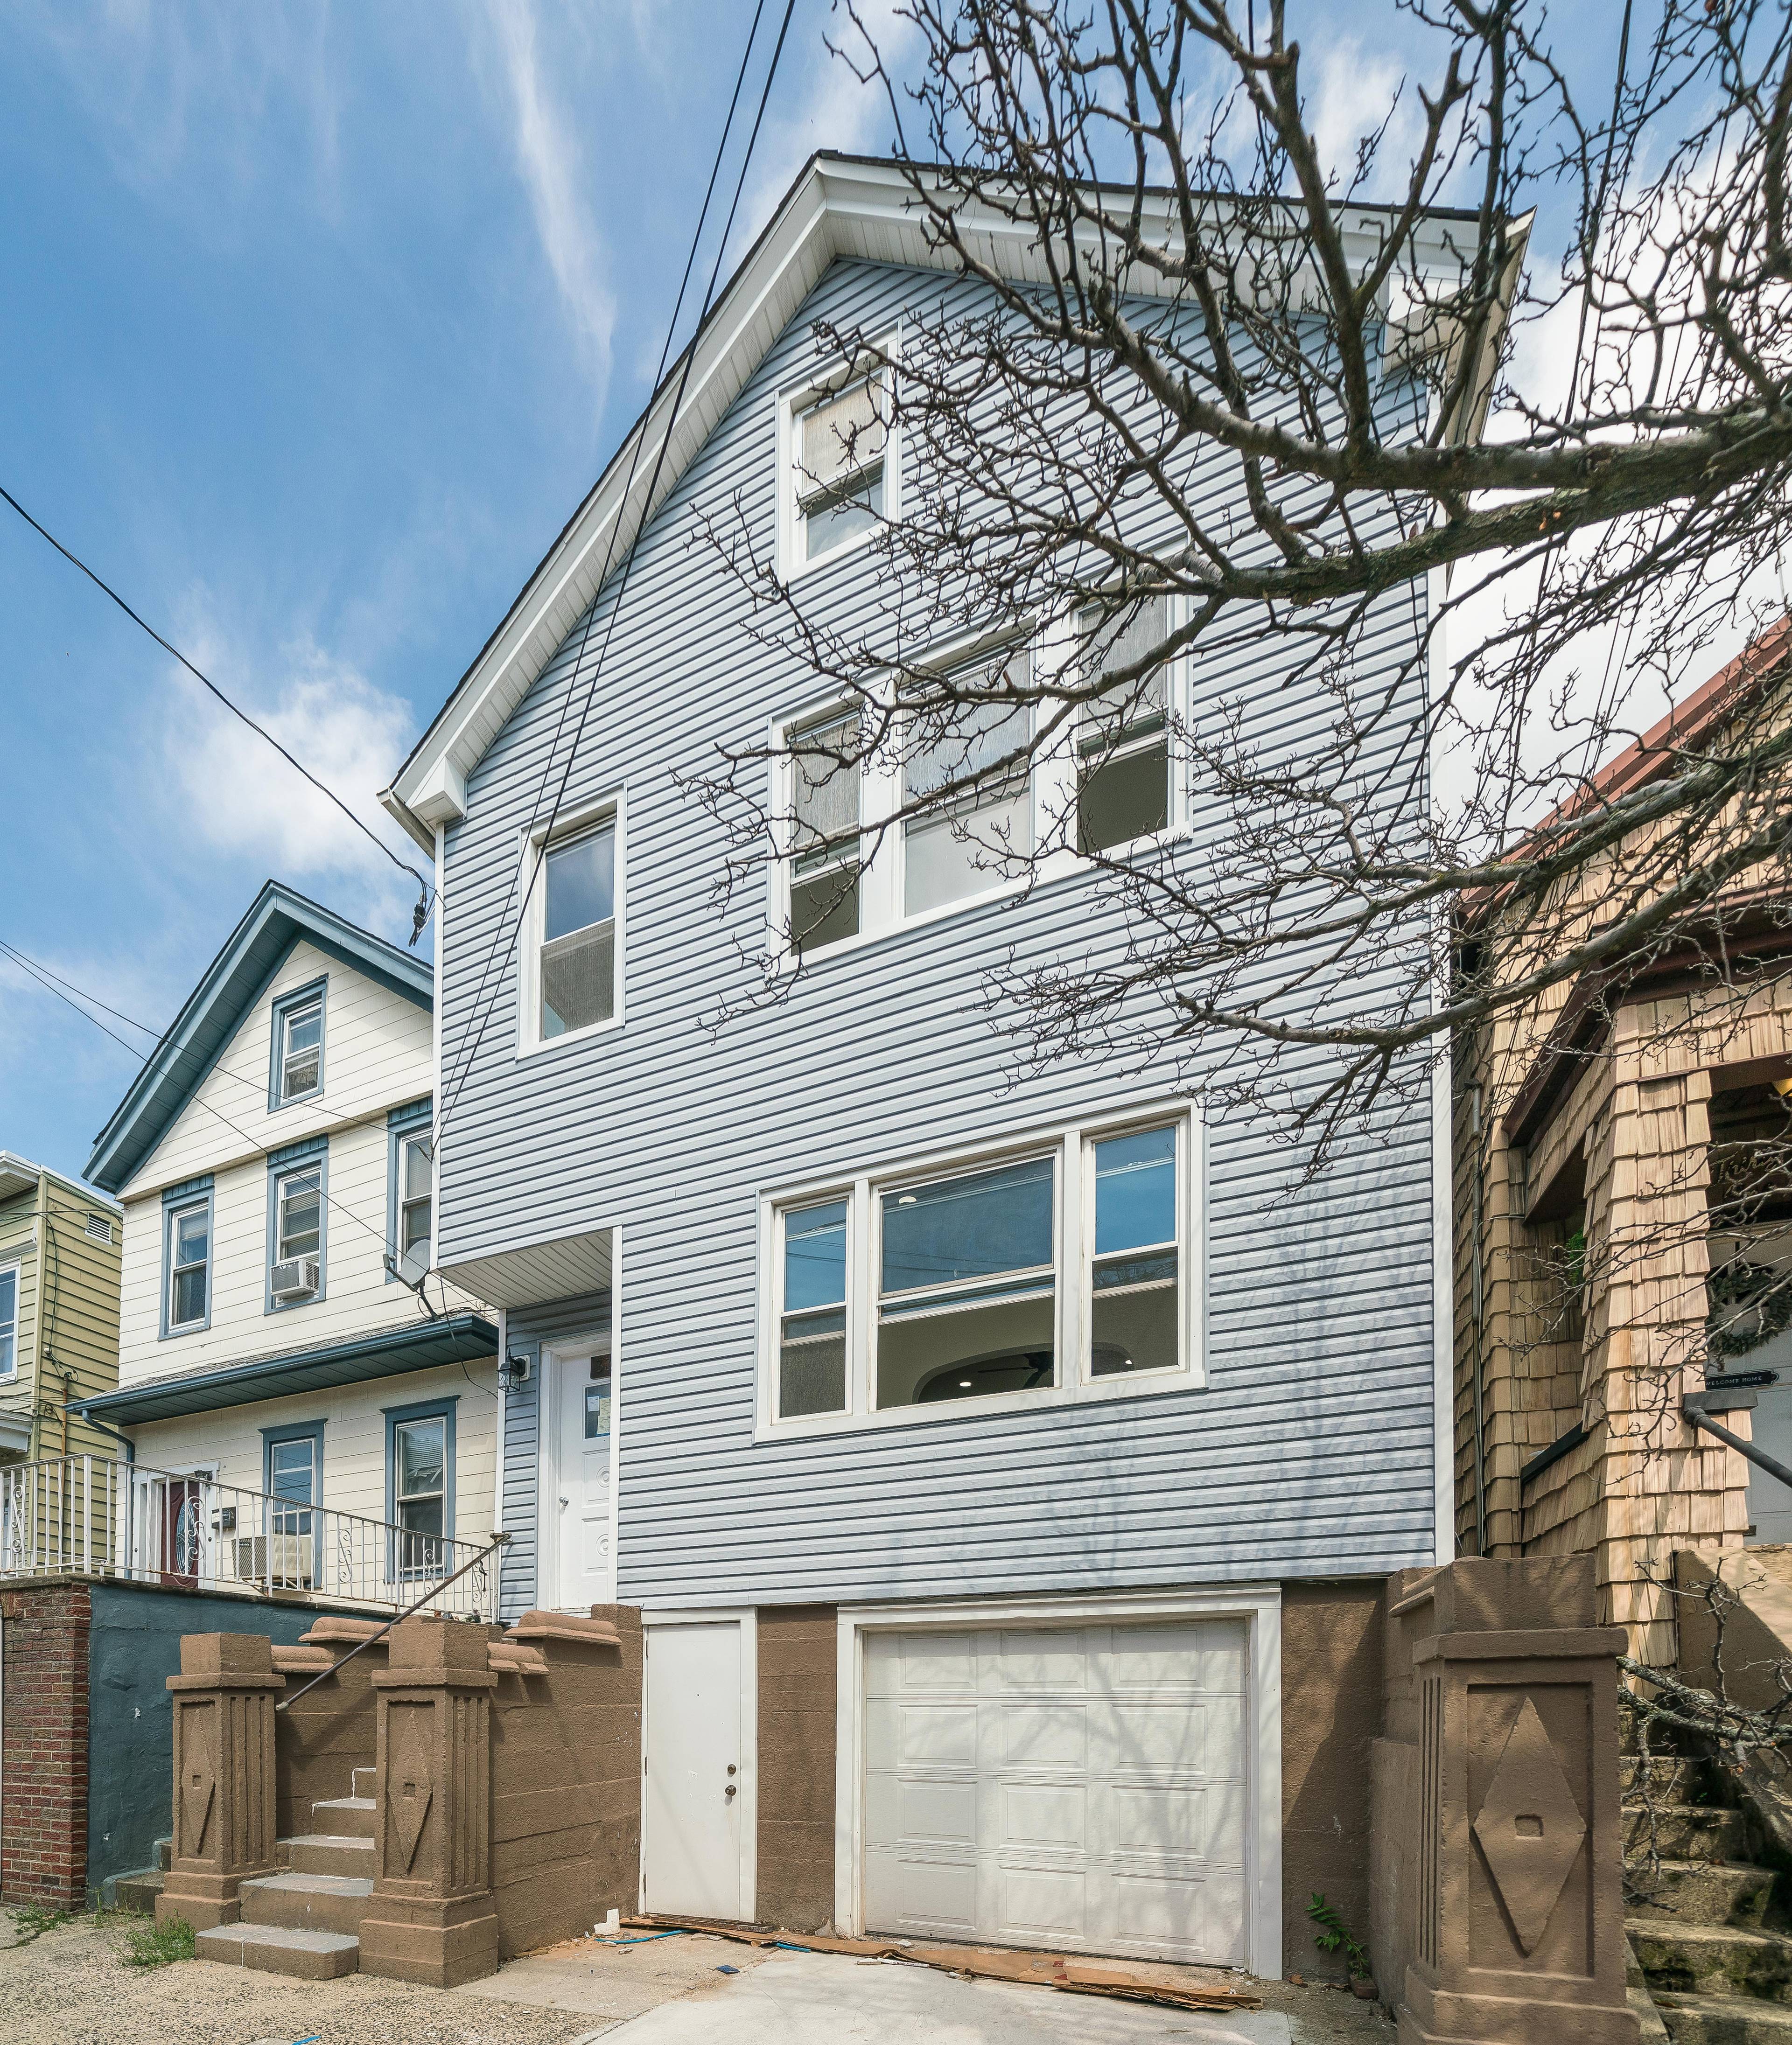 Two-Family Home in Bayonne!